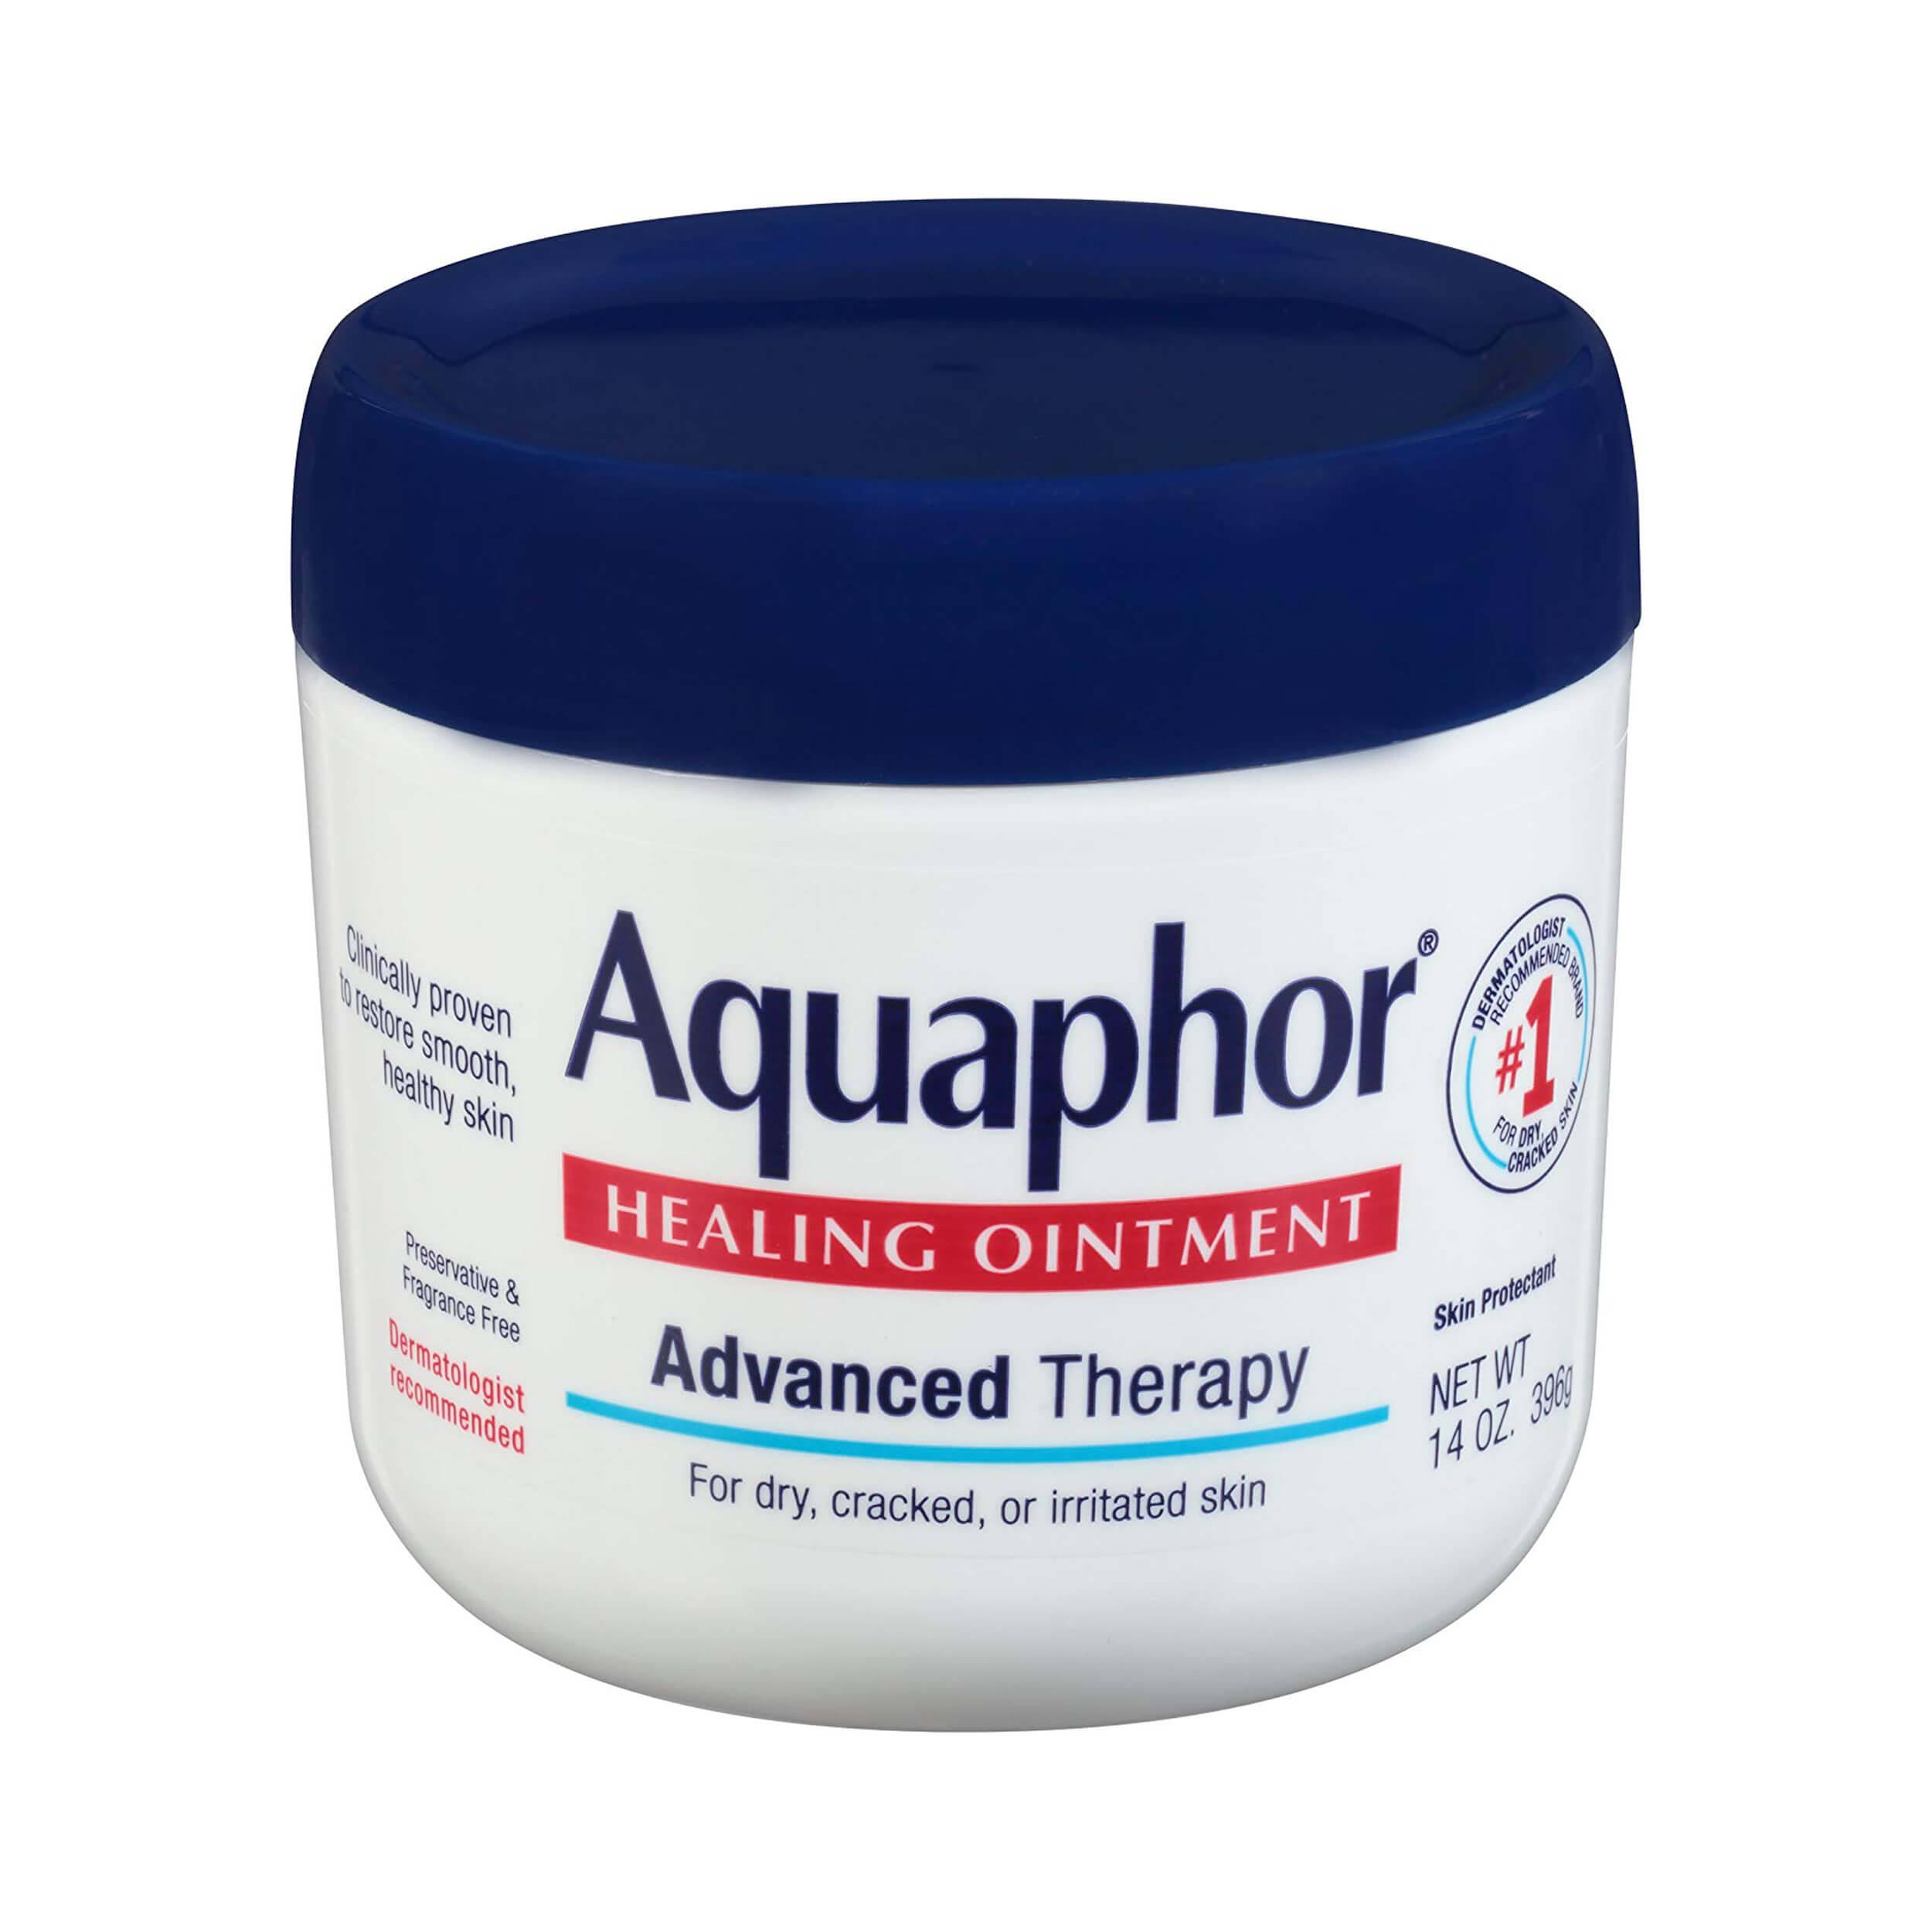 Aquaphor Advanced Therapy Healing Ointment Skin Protectant - 14oz